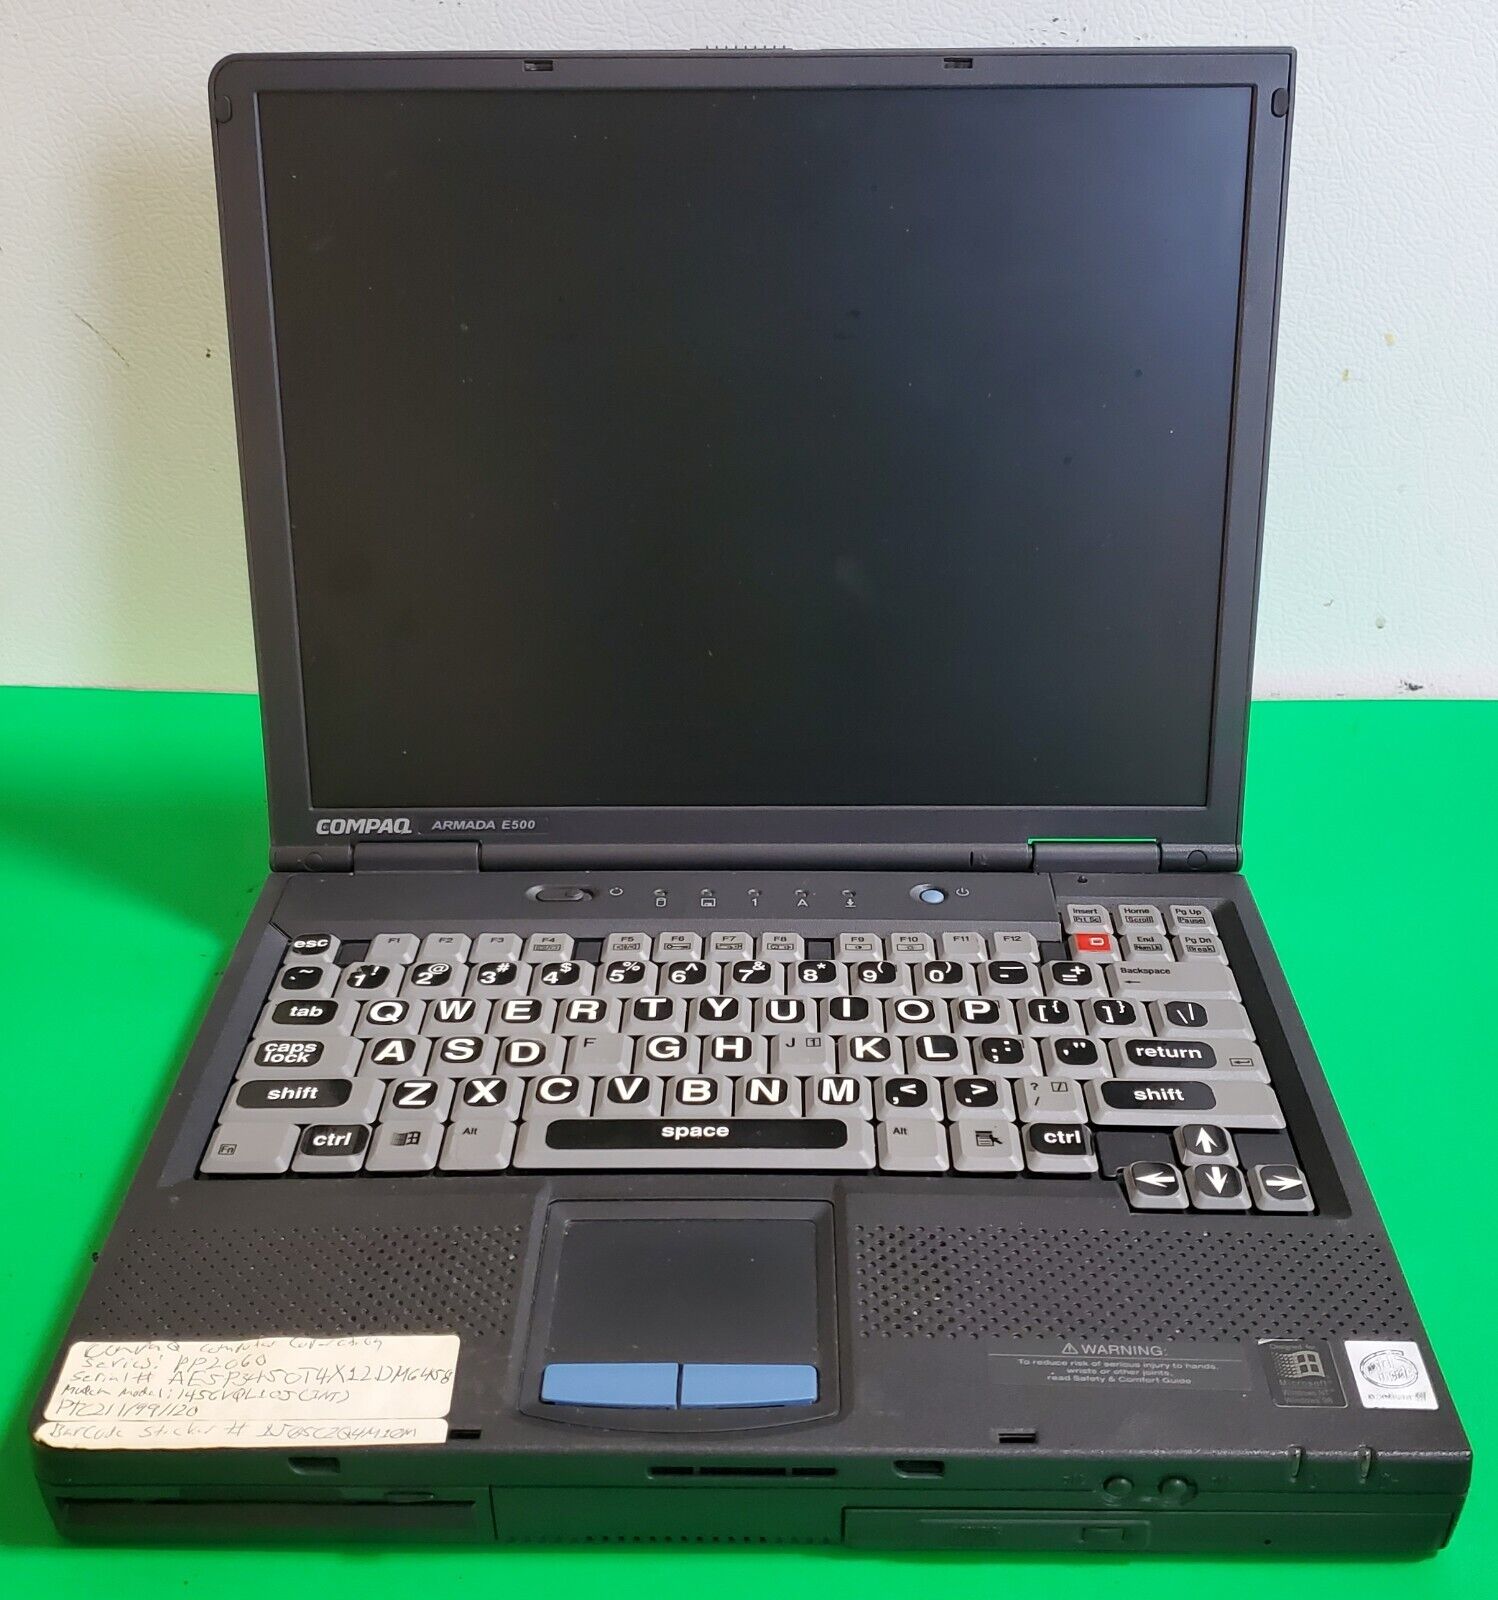 COMPAQ Armada E500 Series PP2060 Laptop Computer Vintage  -  Sold AS IS